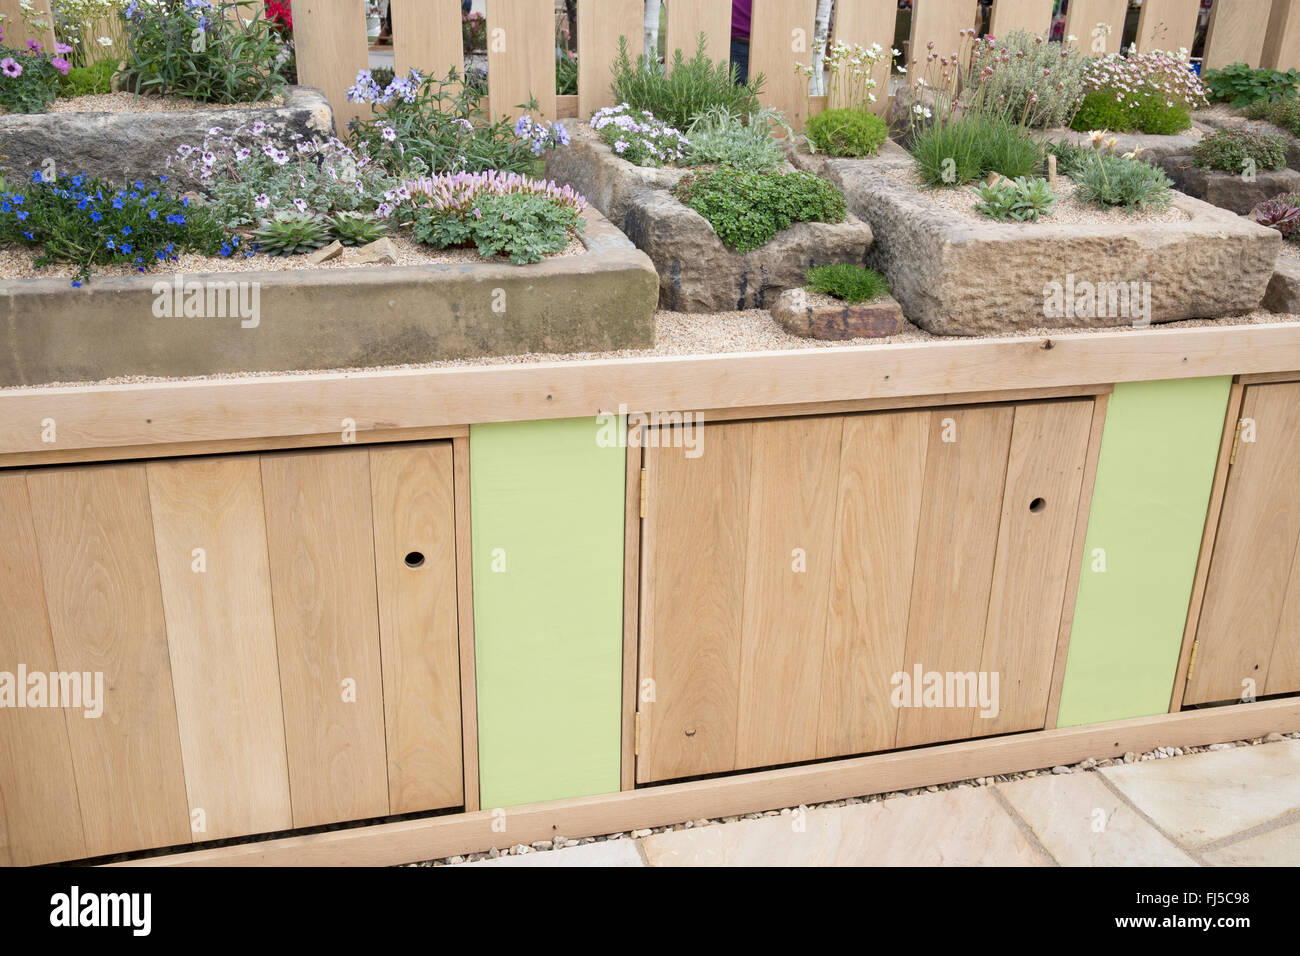 Small urban garden storage cupboards a display of alpine plants grown growing in stone troughs containers container UK Stock Photo